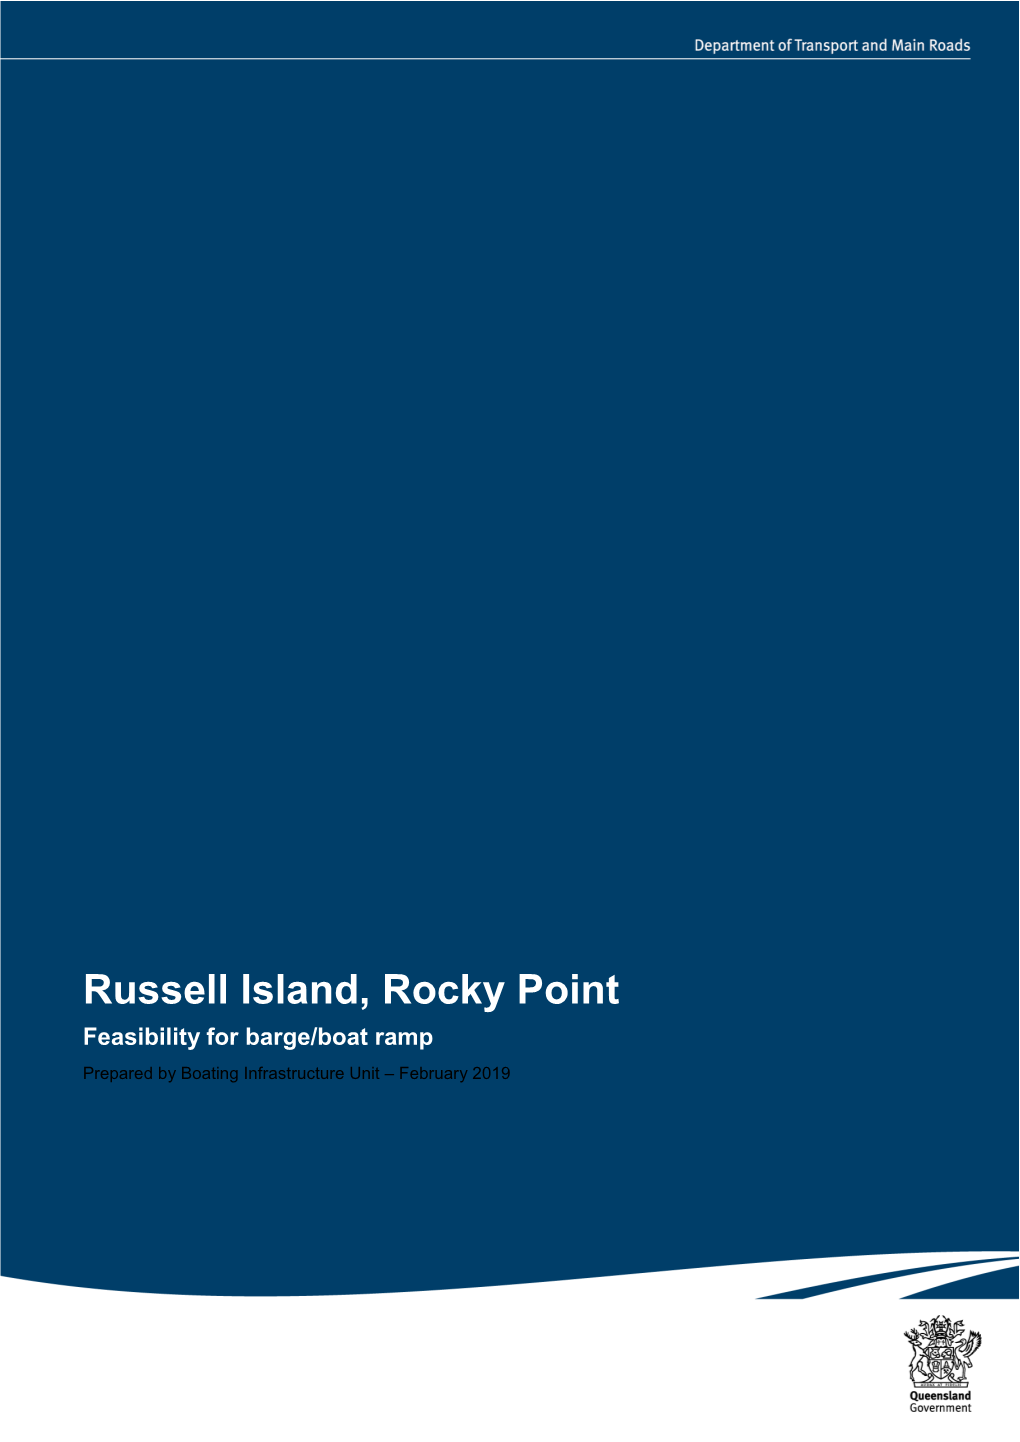 Russell Island, Rocky Point: Feasibility Study for Barge/Boat Ramp February